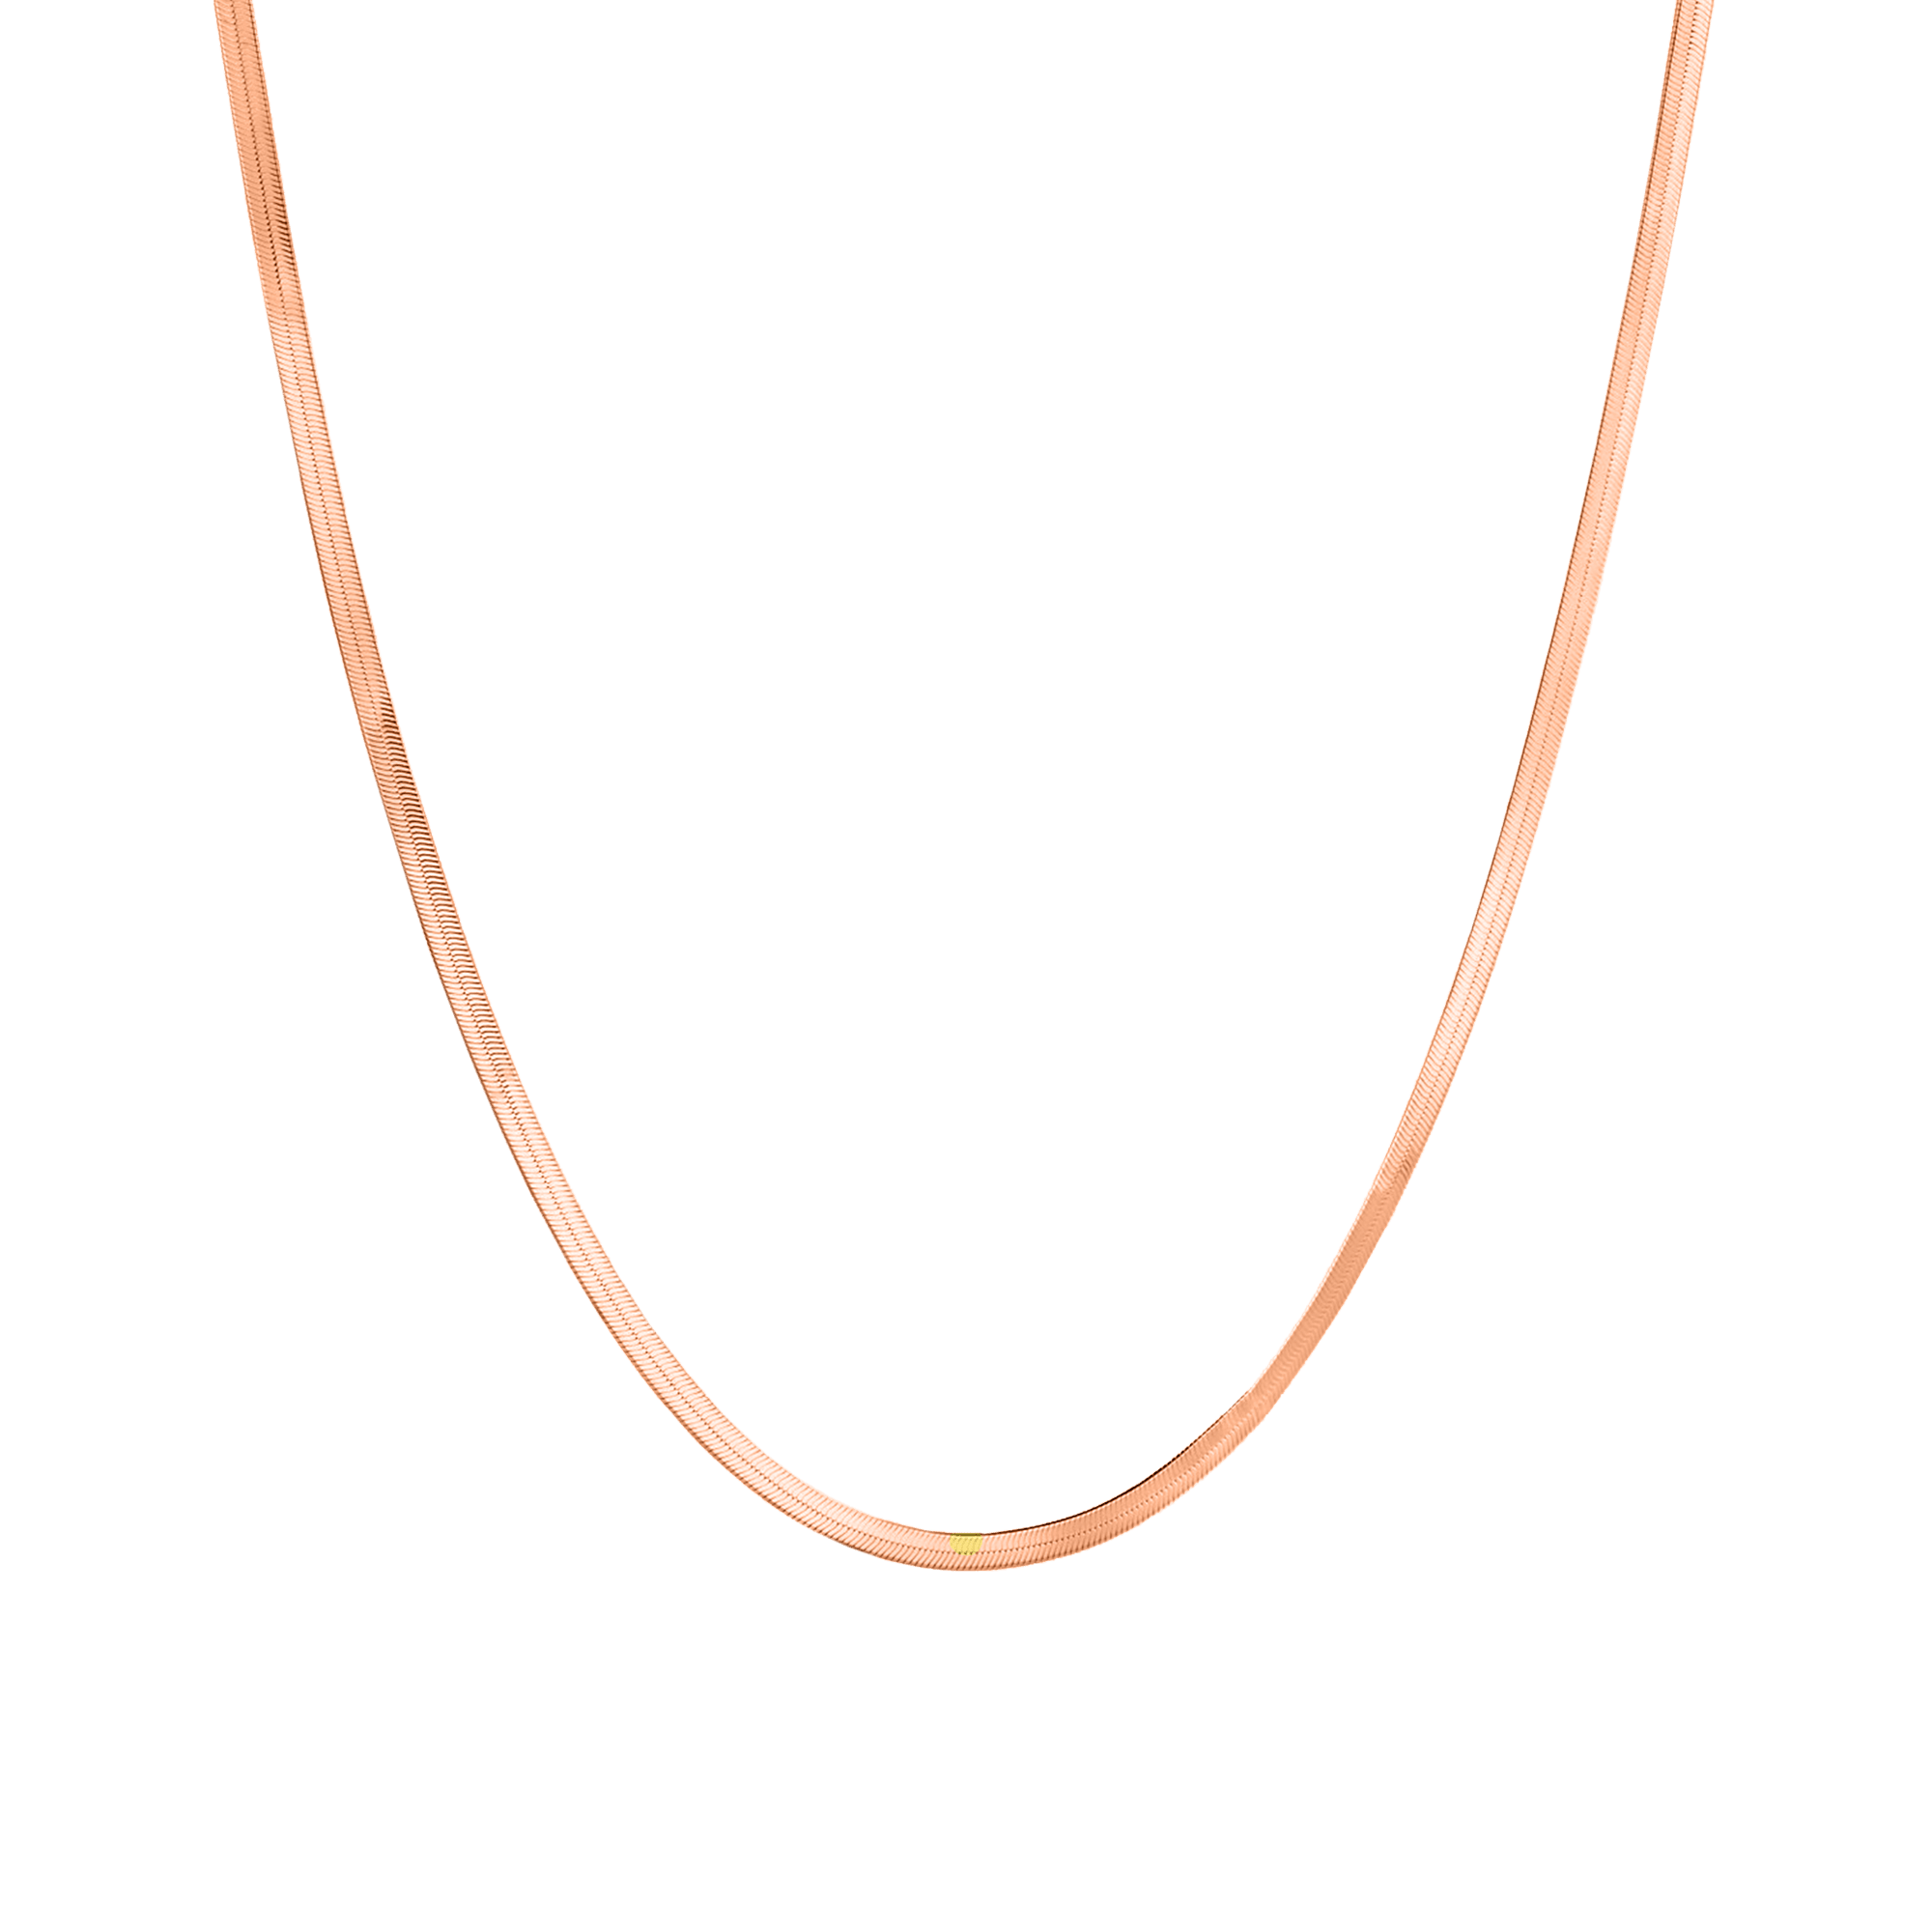 Herringbone Chain Necklace - Gold Vermeil - Engraved Necklace - Gift for Mom - Personalized Necklace - Christmas Gift Ideas